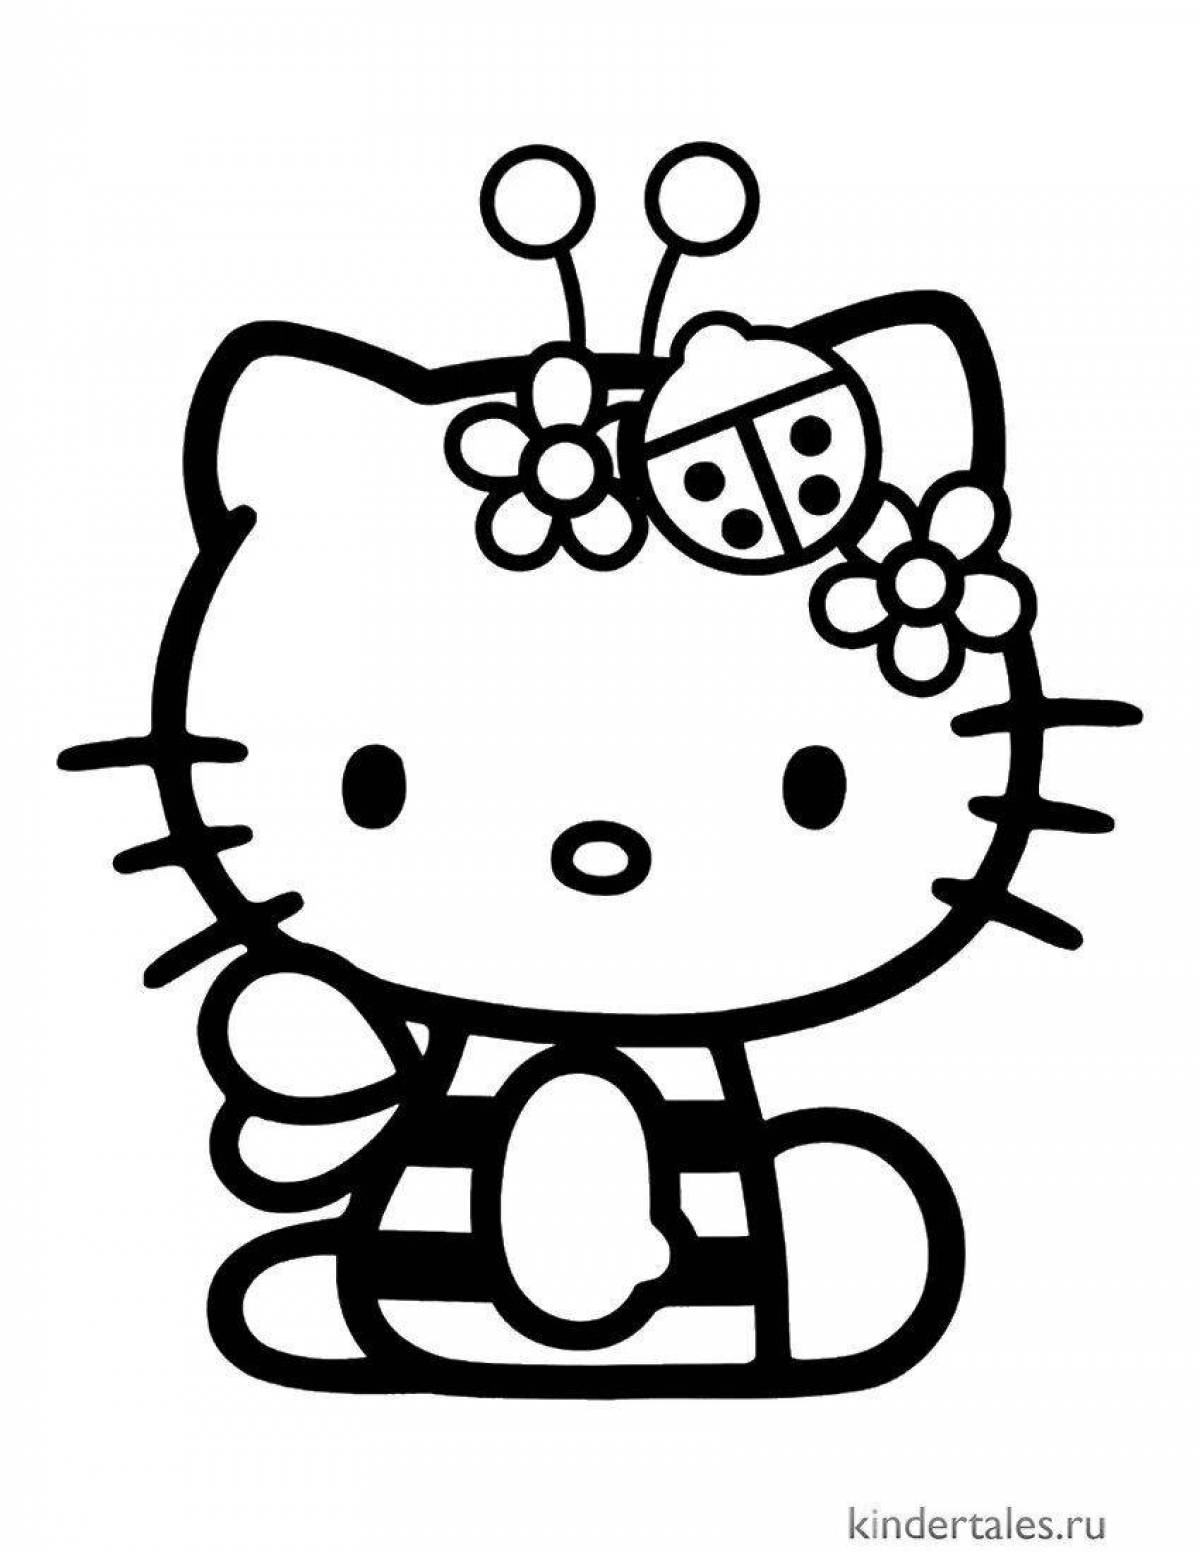 Attractive astro kitty coloring page